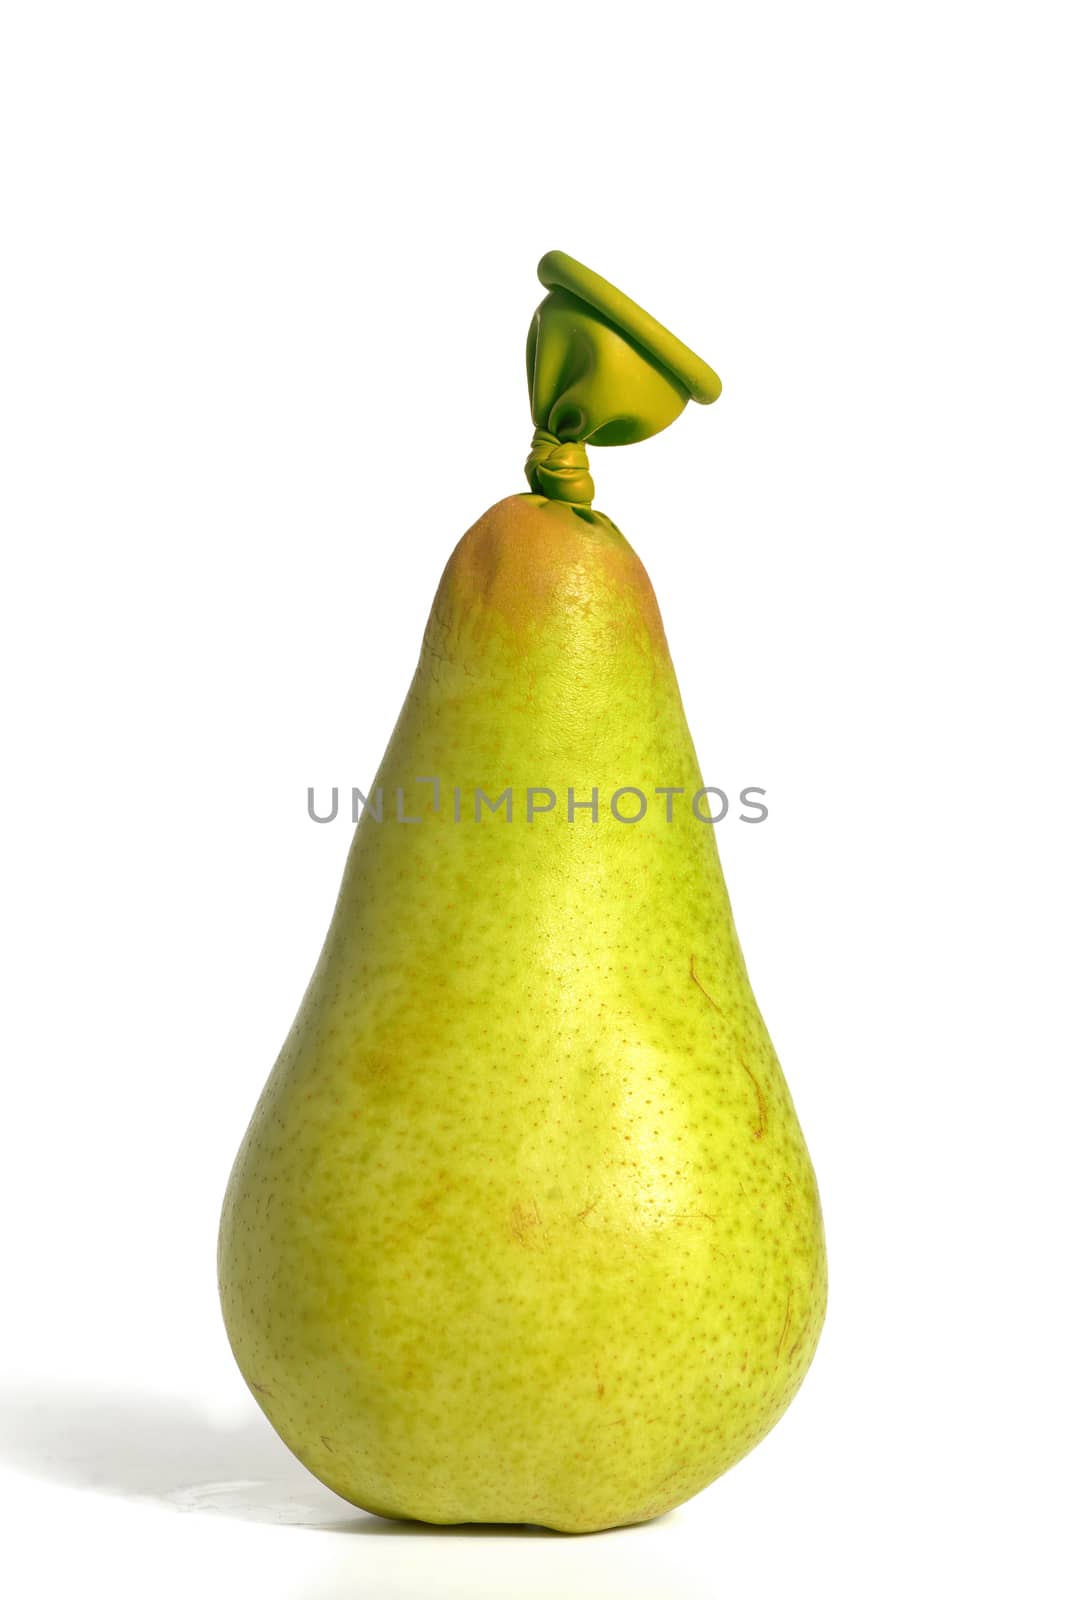 Pear fruit from balloons by mady70